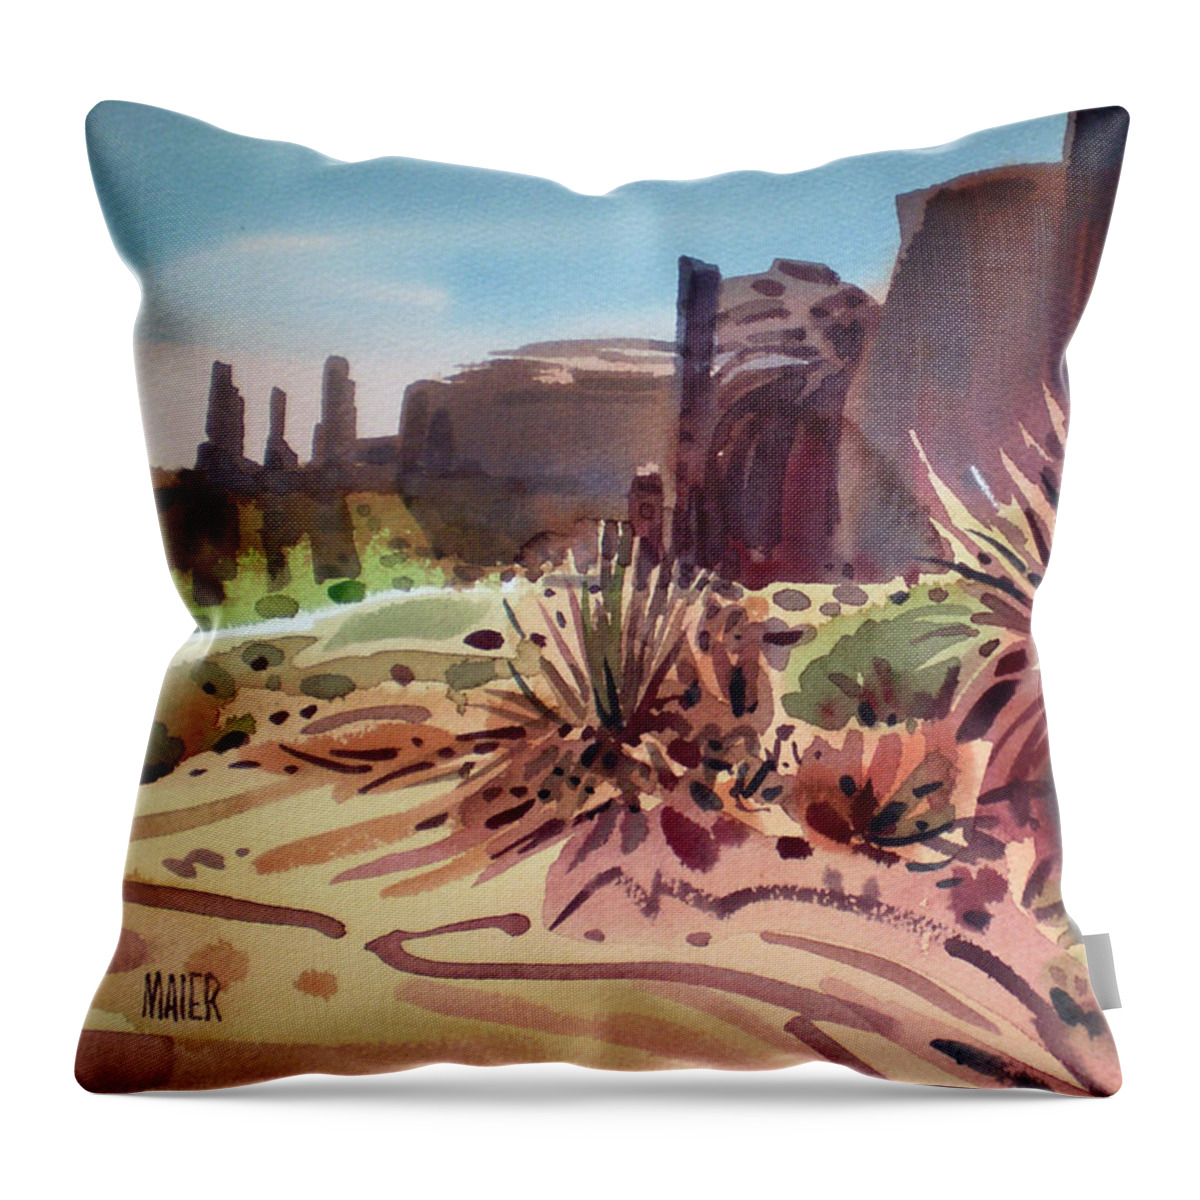 Monument Valley Throw Pillow featuring the painting Across Monument Valley by Donald Maier